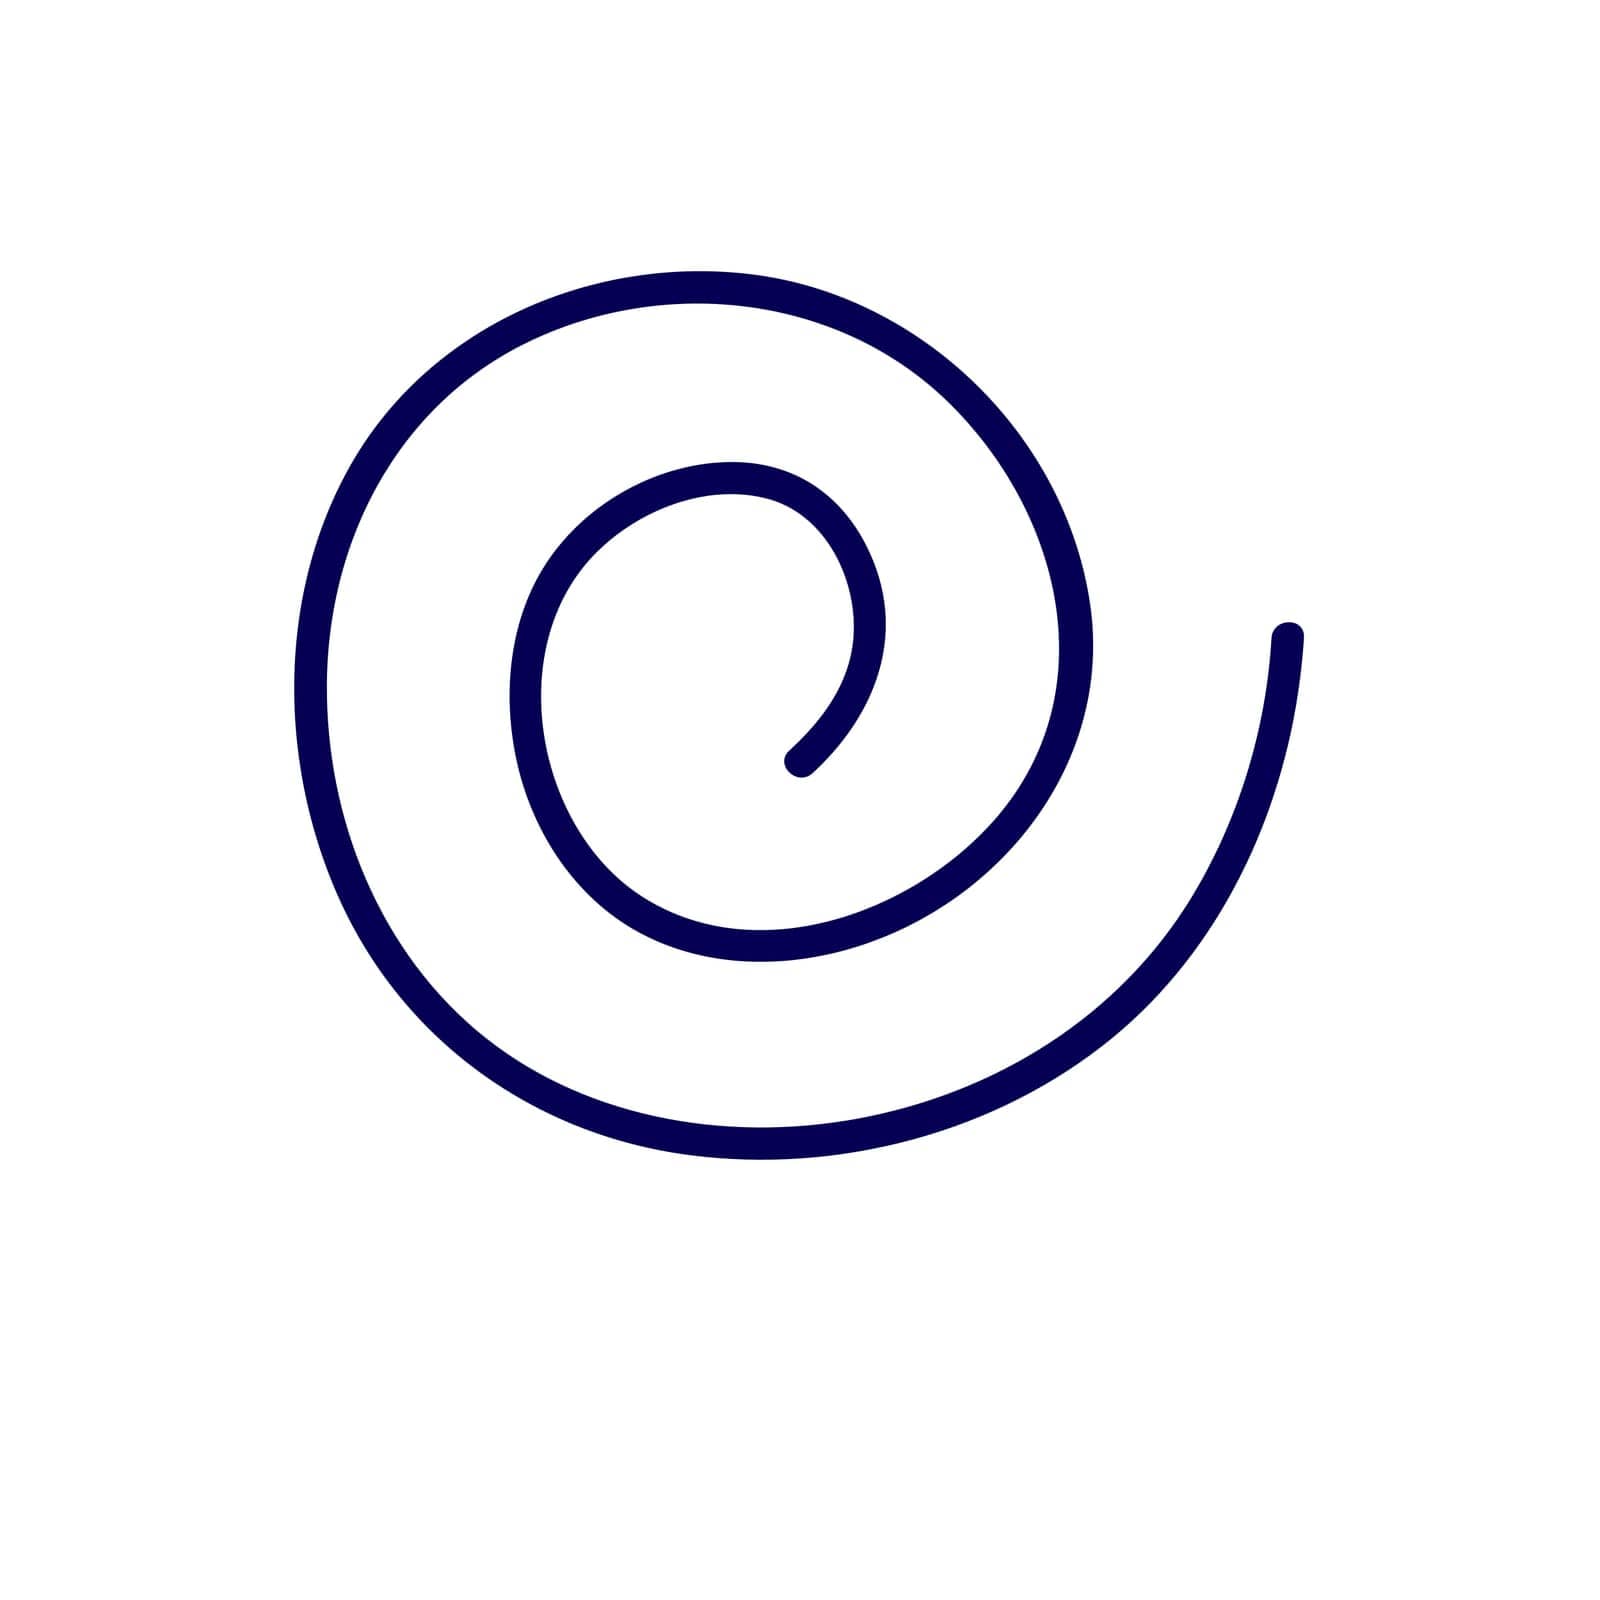 esoteric astrological symbol of the spiral by Dustick